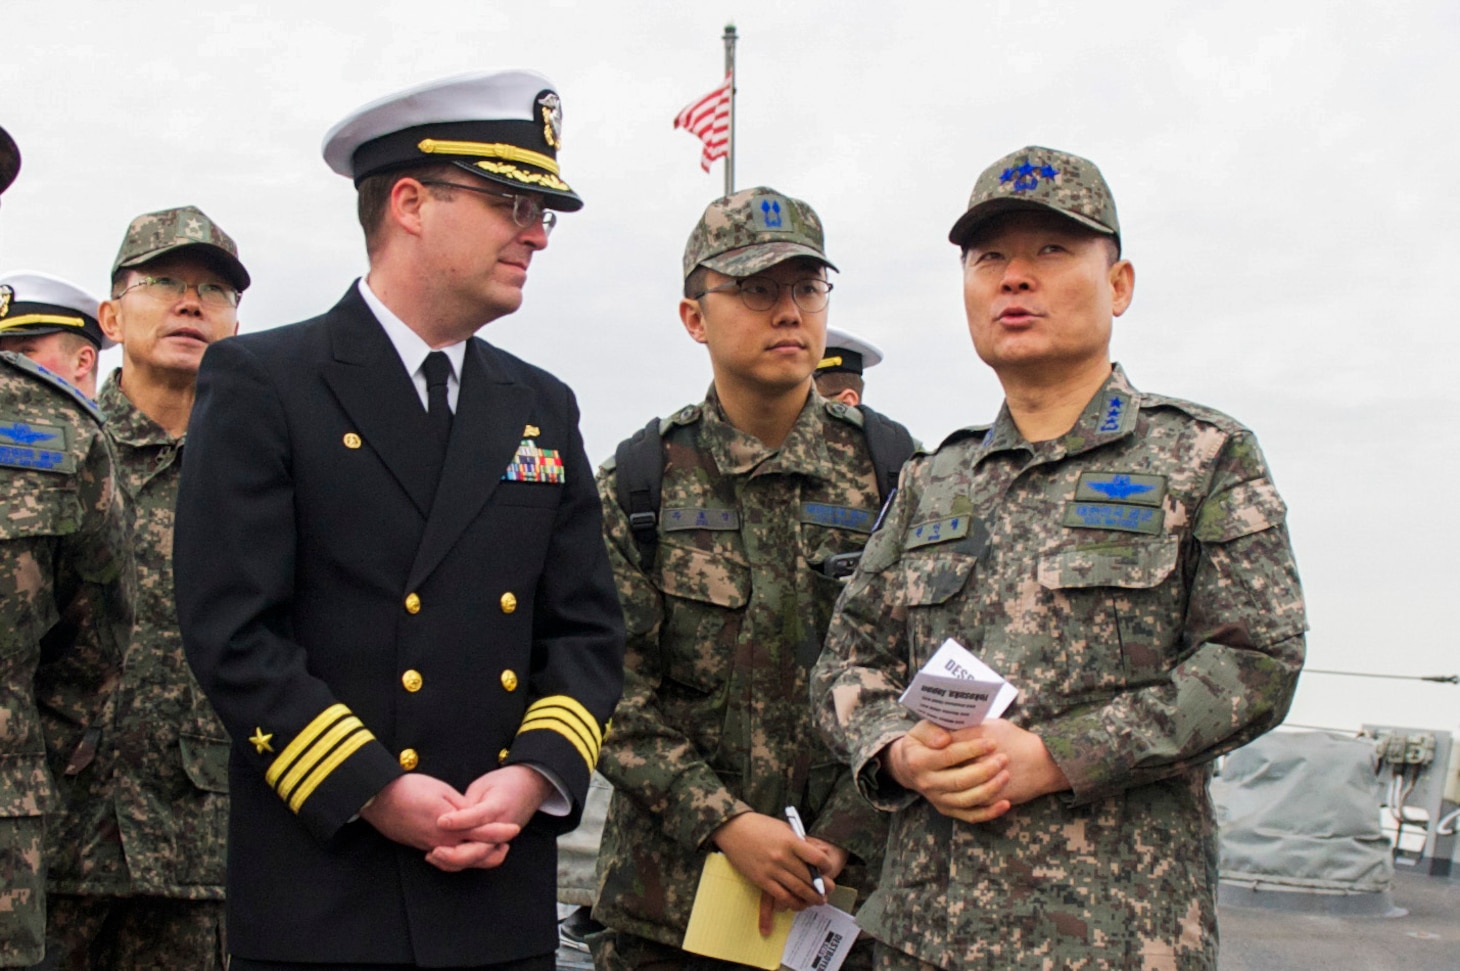 YOKOSUKA, Japan (Jan. 15, 2019) Cmdr. William C. Blodgett, the commanding officer of the Arleigh Burke-class guided-missile destroyer USS Barry (DDG 52) and Lt. Gen. Inchoul Won, vice chairman of the Republic of Korea Joint Chiefs of Staff speak during a ship tour aboard Barry. Barry is forward-deployed to the U.S. 7th Fleet area of operations in support of security and stability in the Indo-Pacific region. (U.S. Navy photo by Mass Communication Specialist 3rd Class Codie L. Soule)